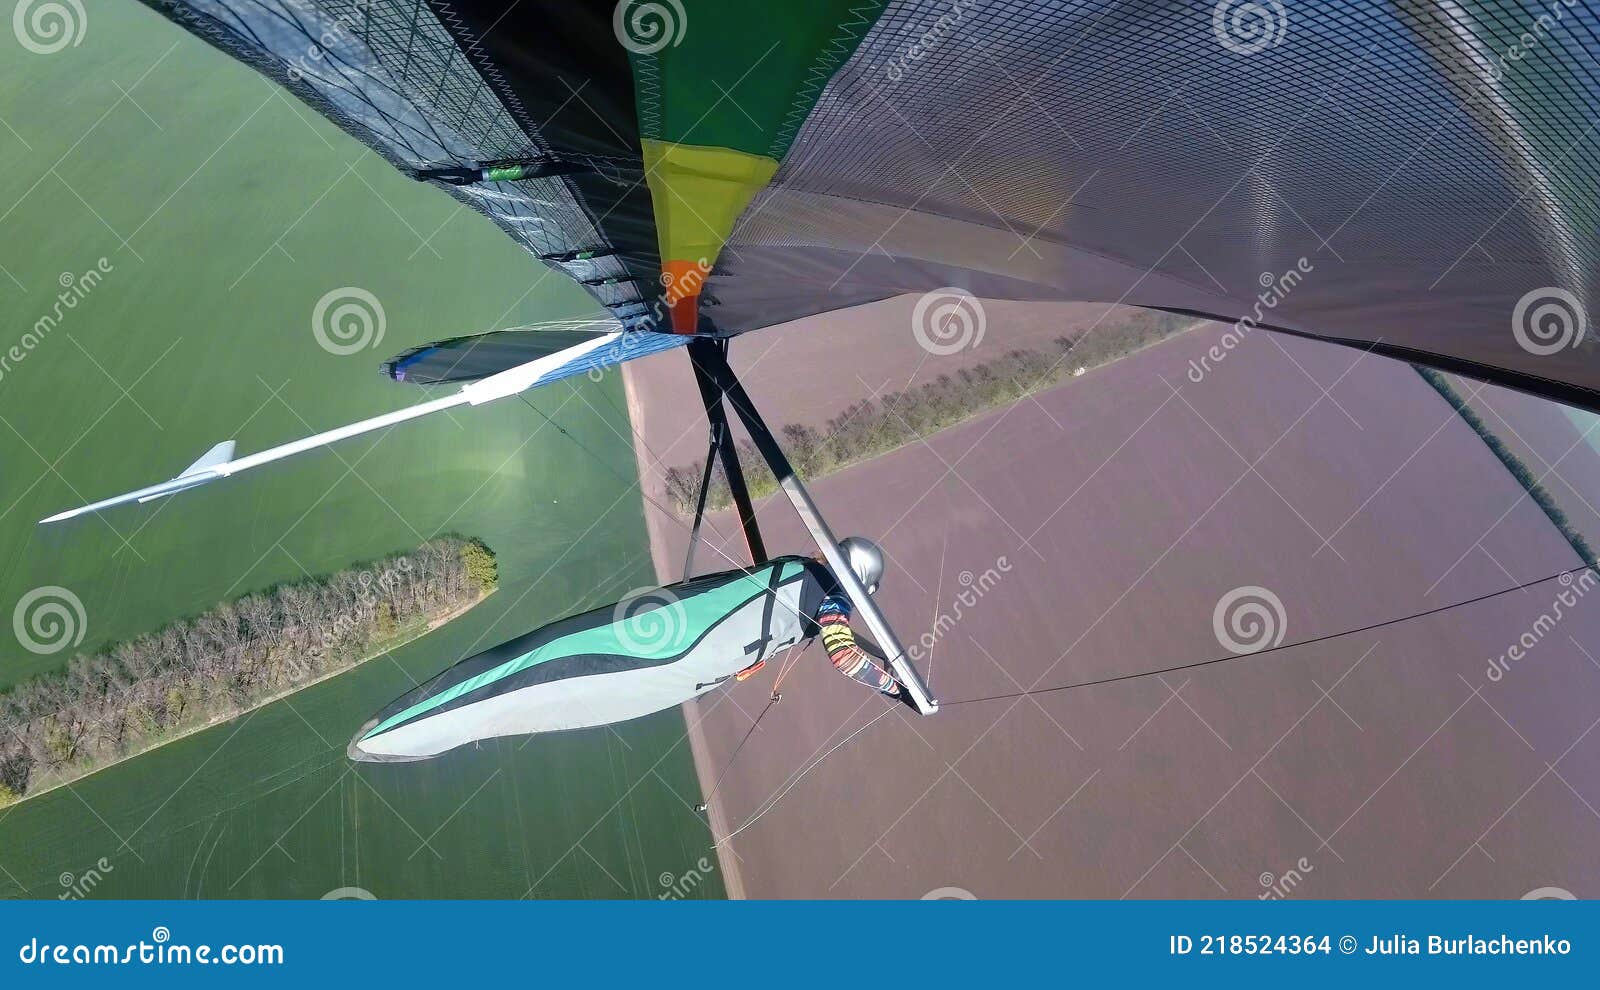 colorful hangglider wing soars above green cultivated fields